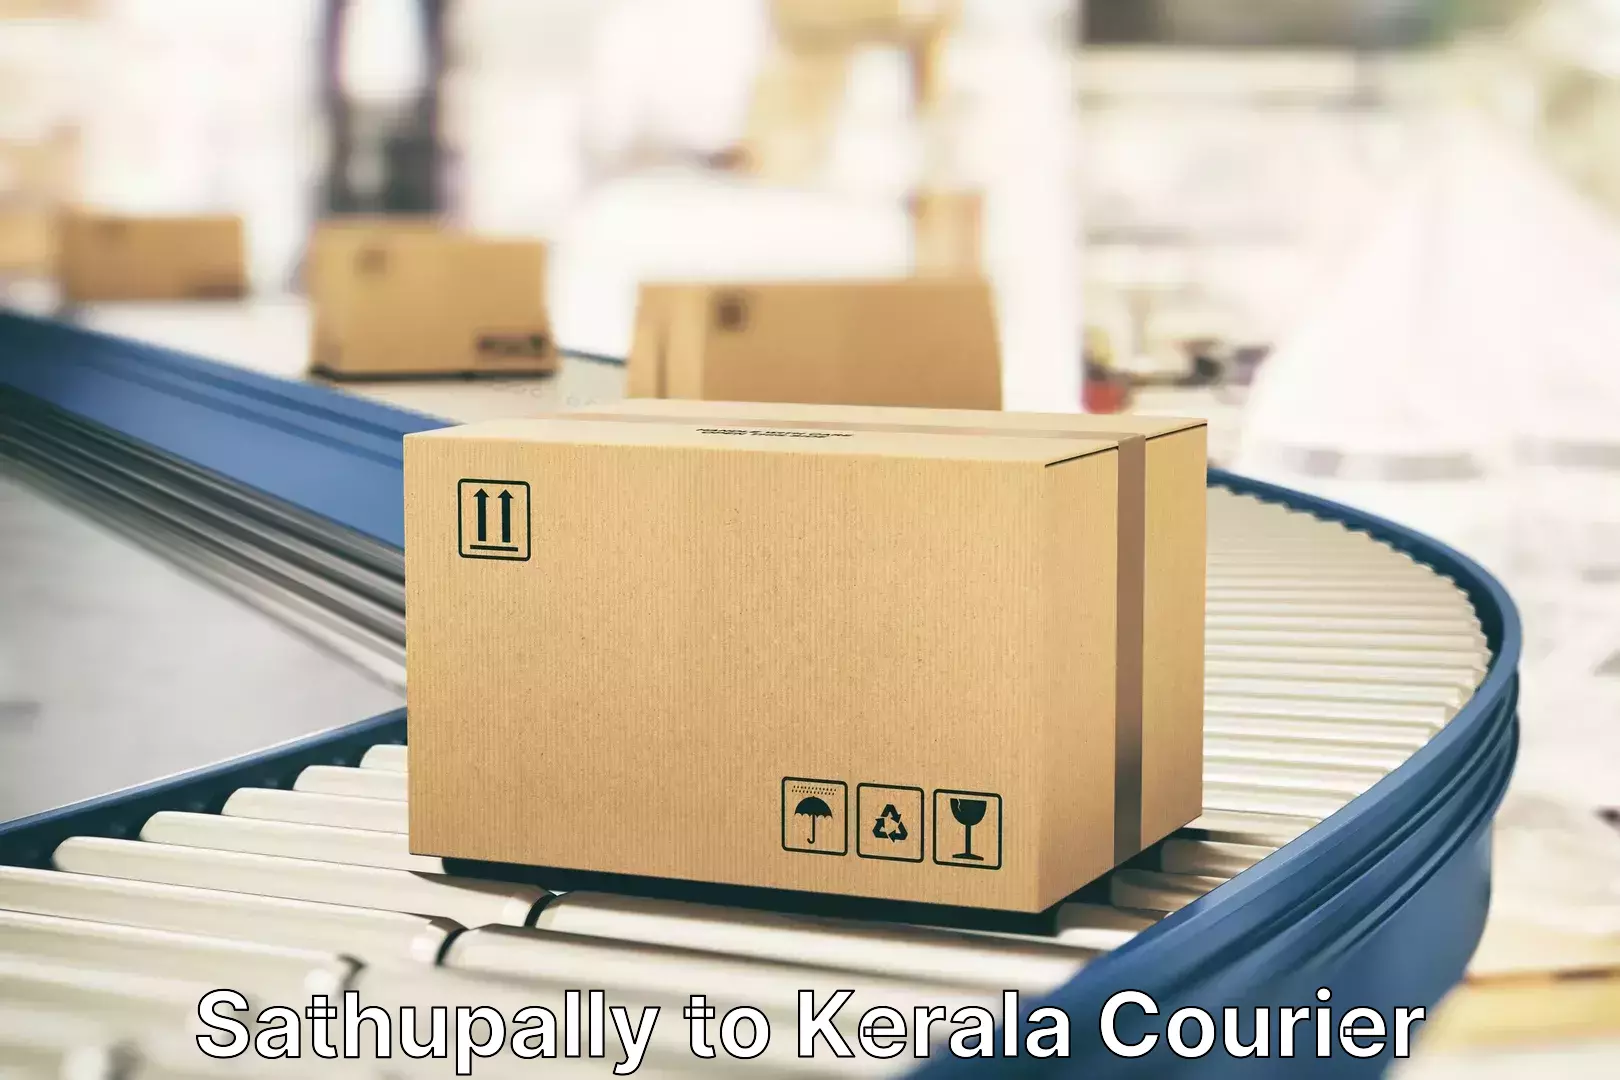 Express luggage delivery Sathupally to Wayanad